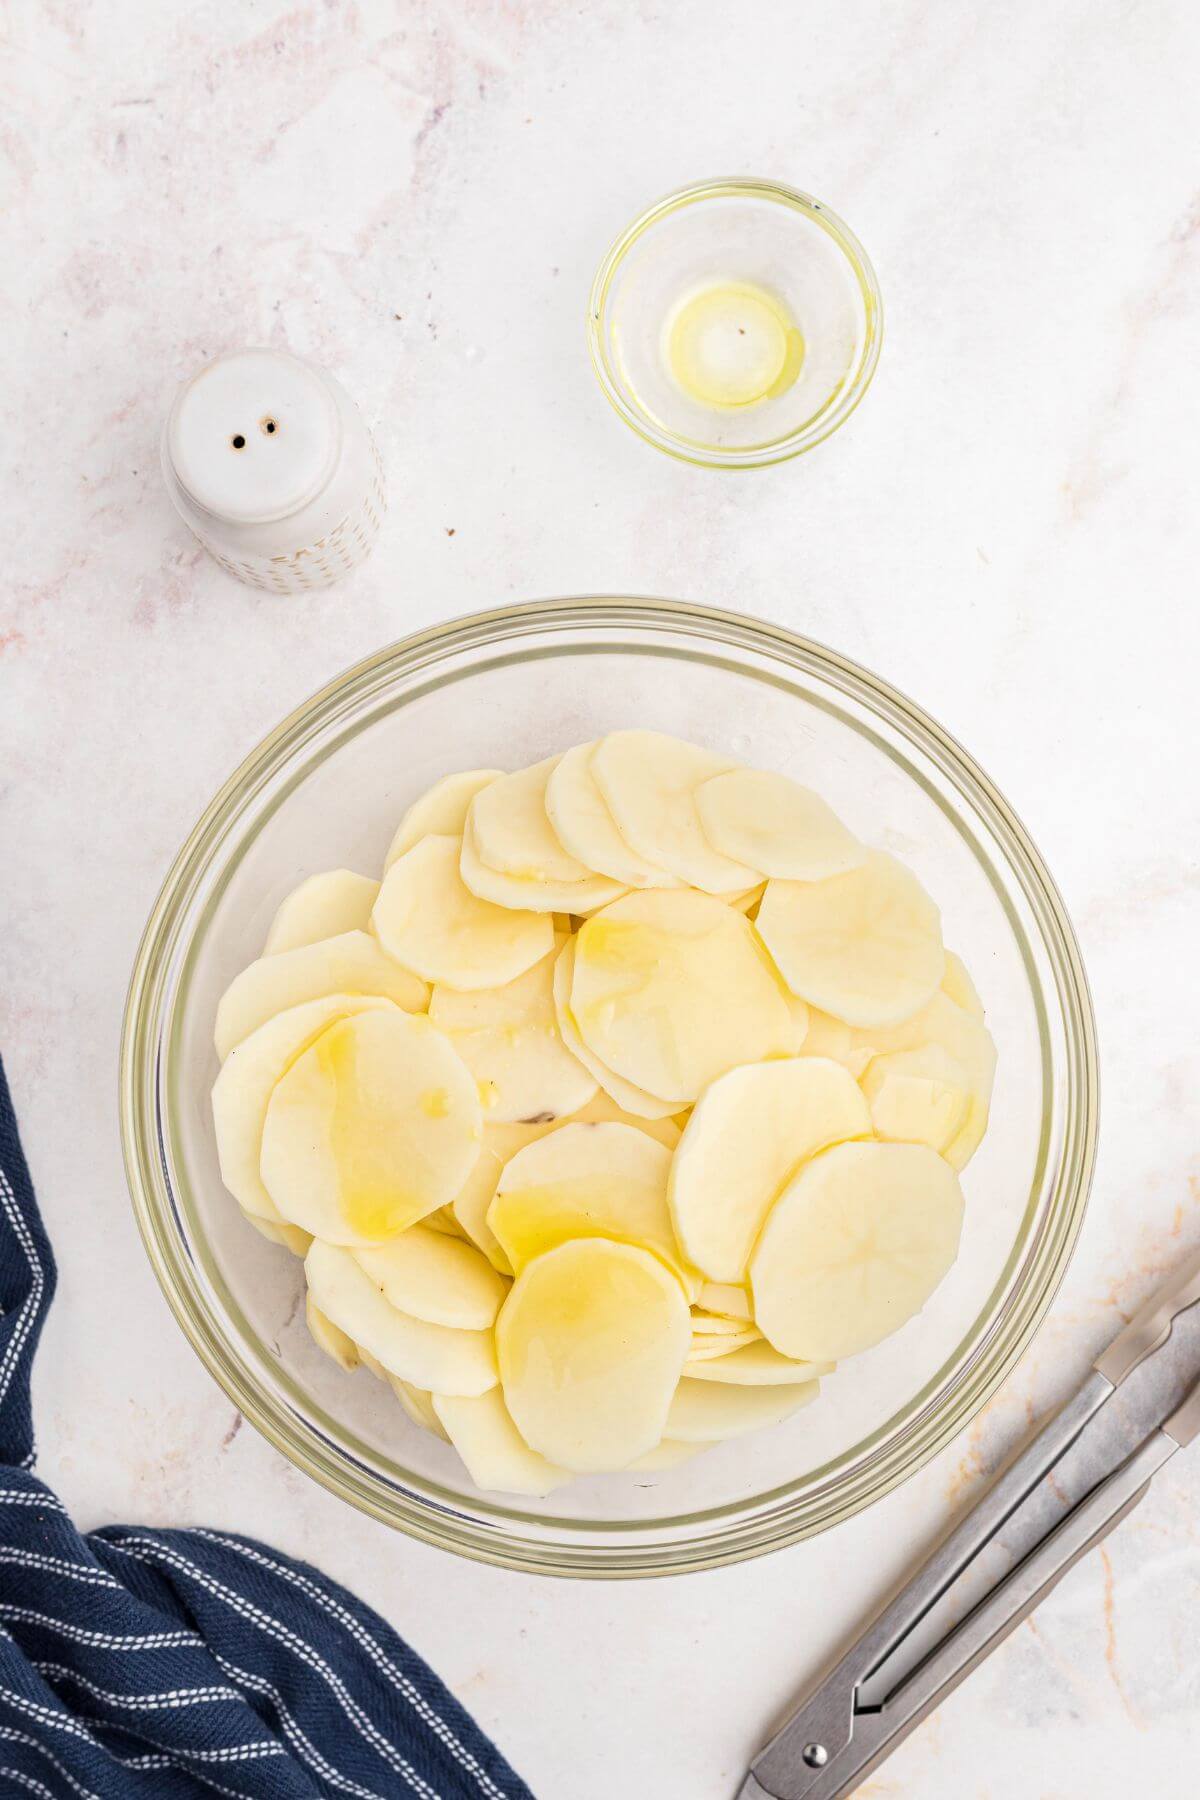 Potato slices in a clear glass bowl with olive oil.